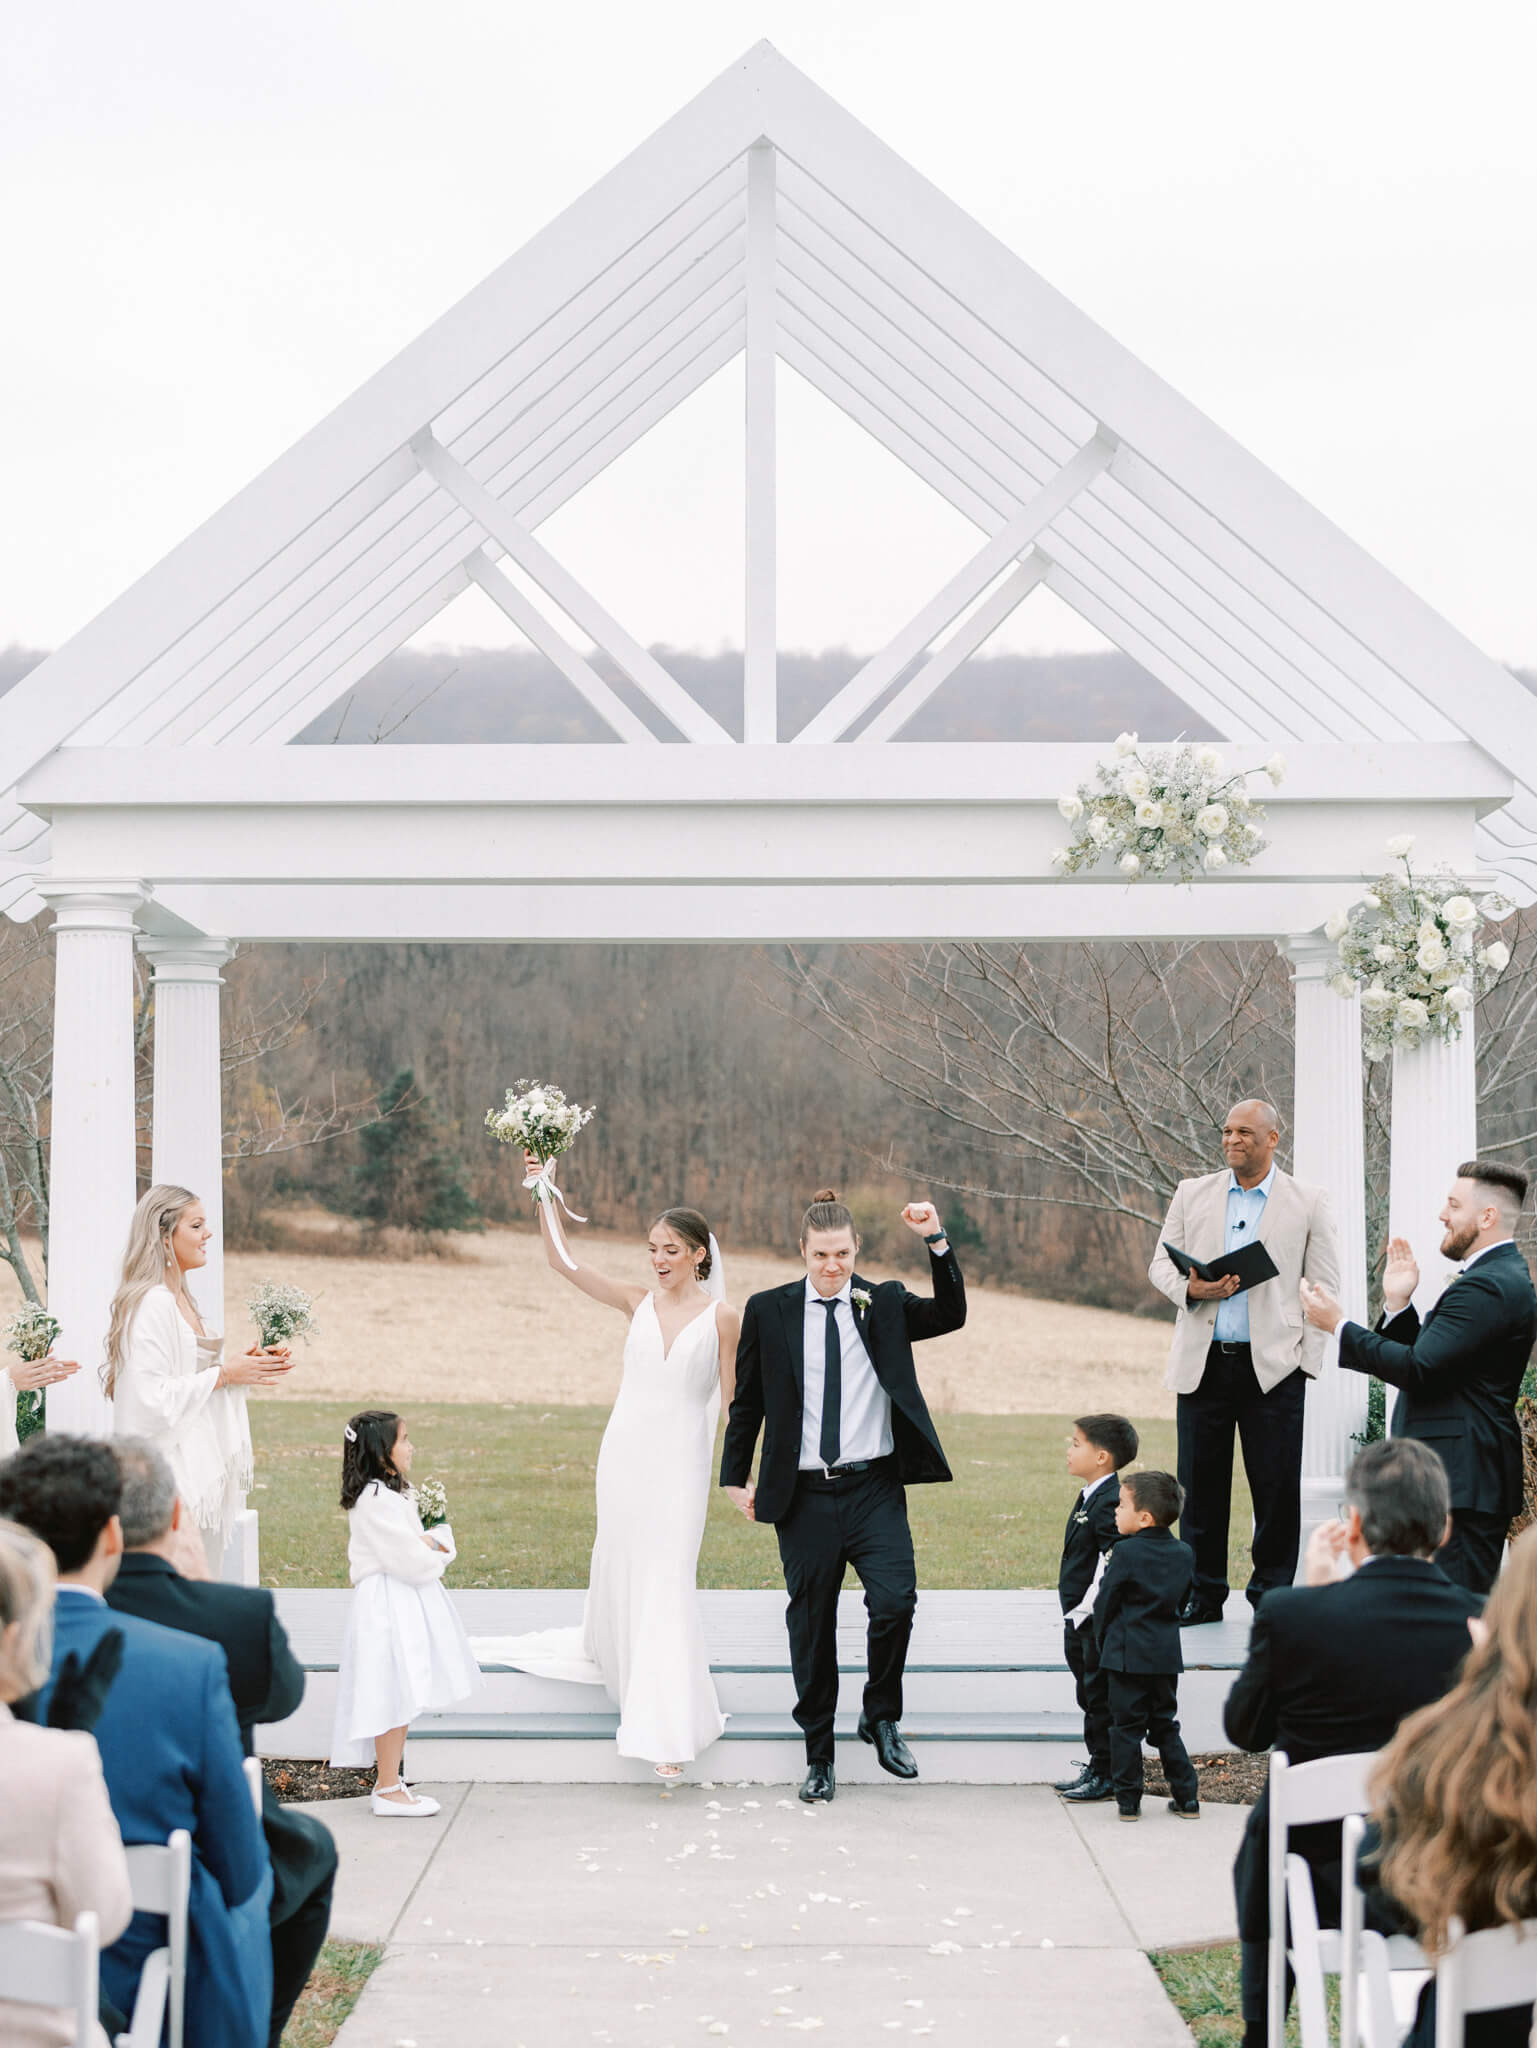 A bride and groom cheering in front of their guests and walking down the aisle after being pronounced husband and wife.